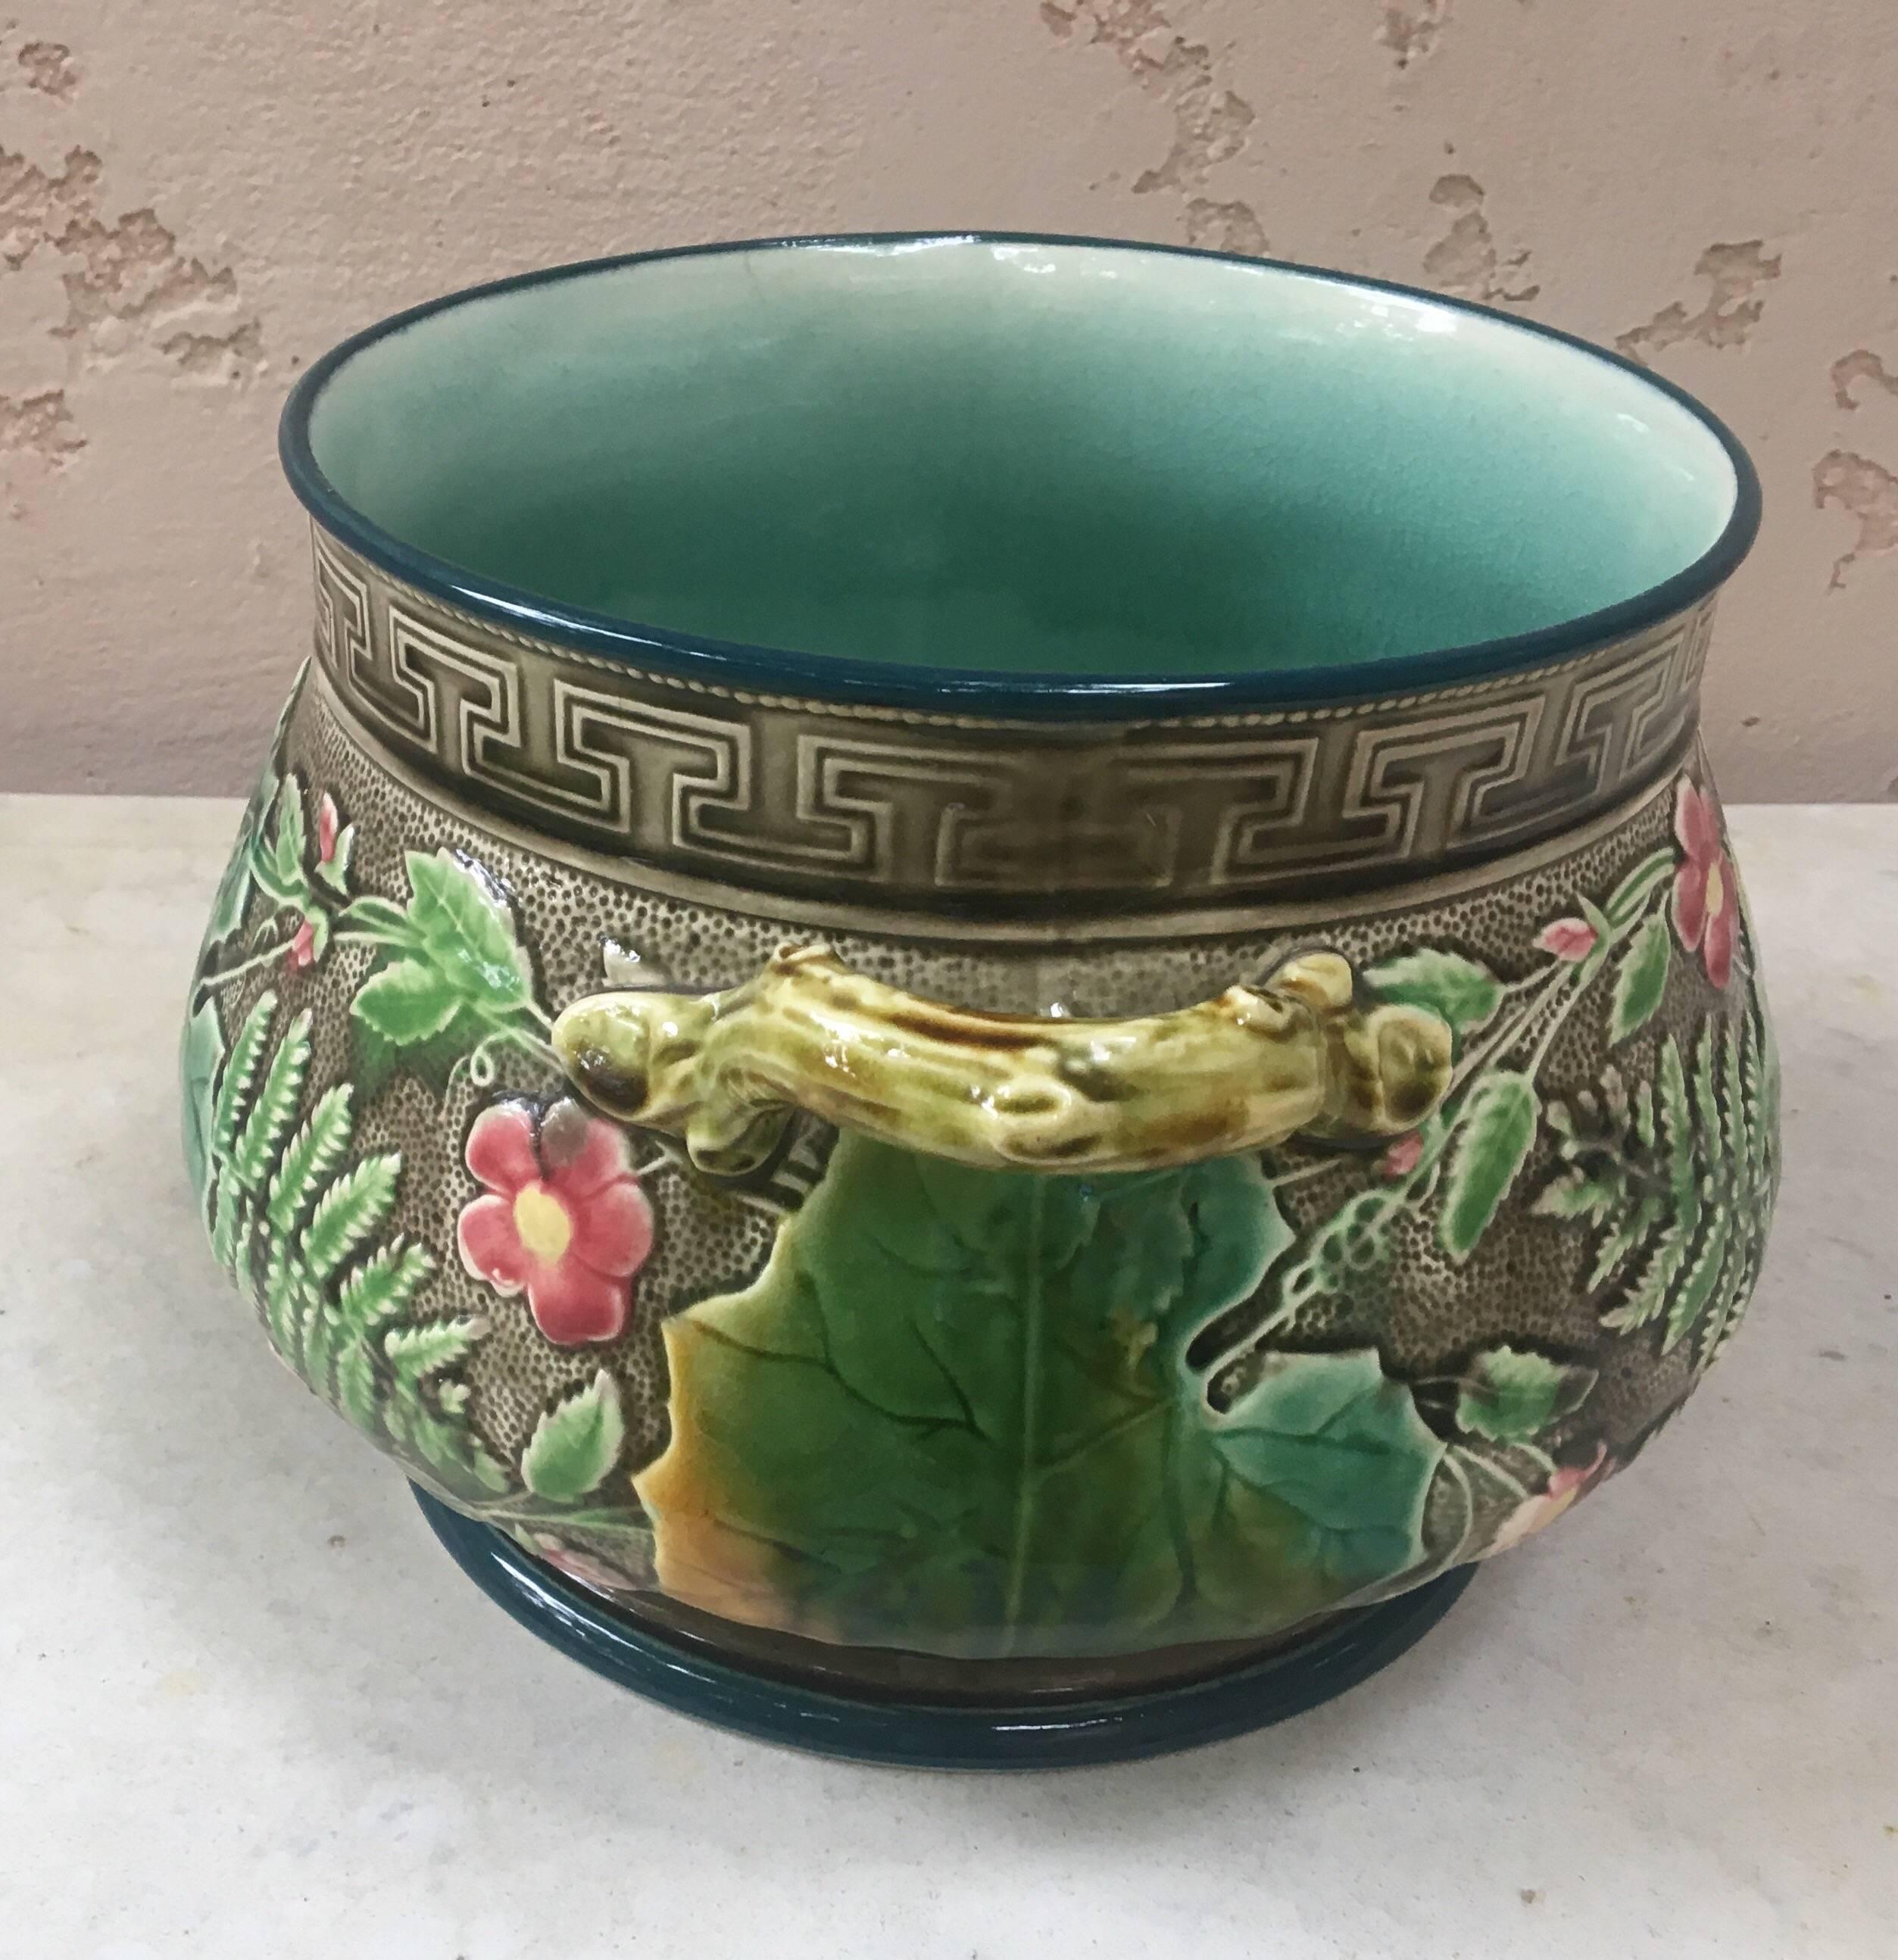 Naturalistic Majolica handled cache pot decorated with leaves, fern, pink flowers on a grey background circa 1880 signed Hippolyte Boulenger Choisy-le-Roi.
A grey key border on the top of the jardinière.
 